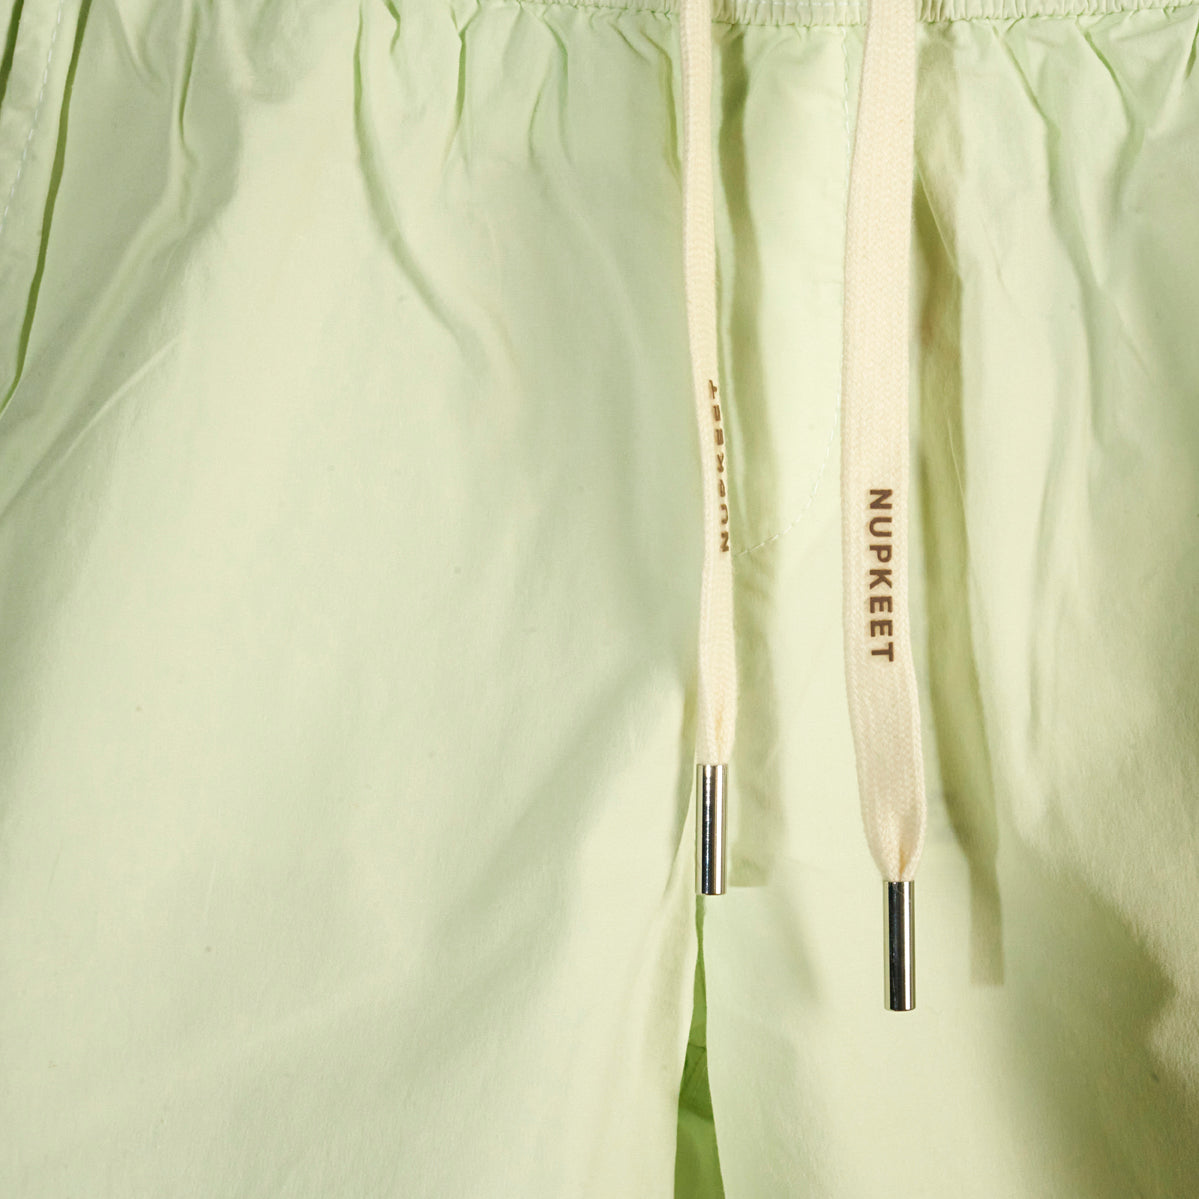 Shorts color lime in tessuto parachute